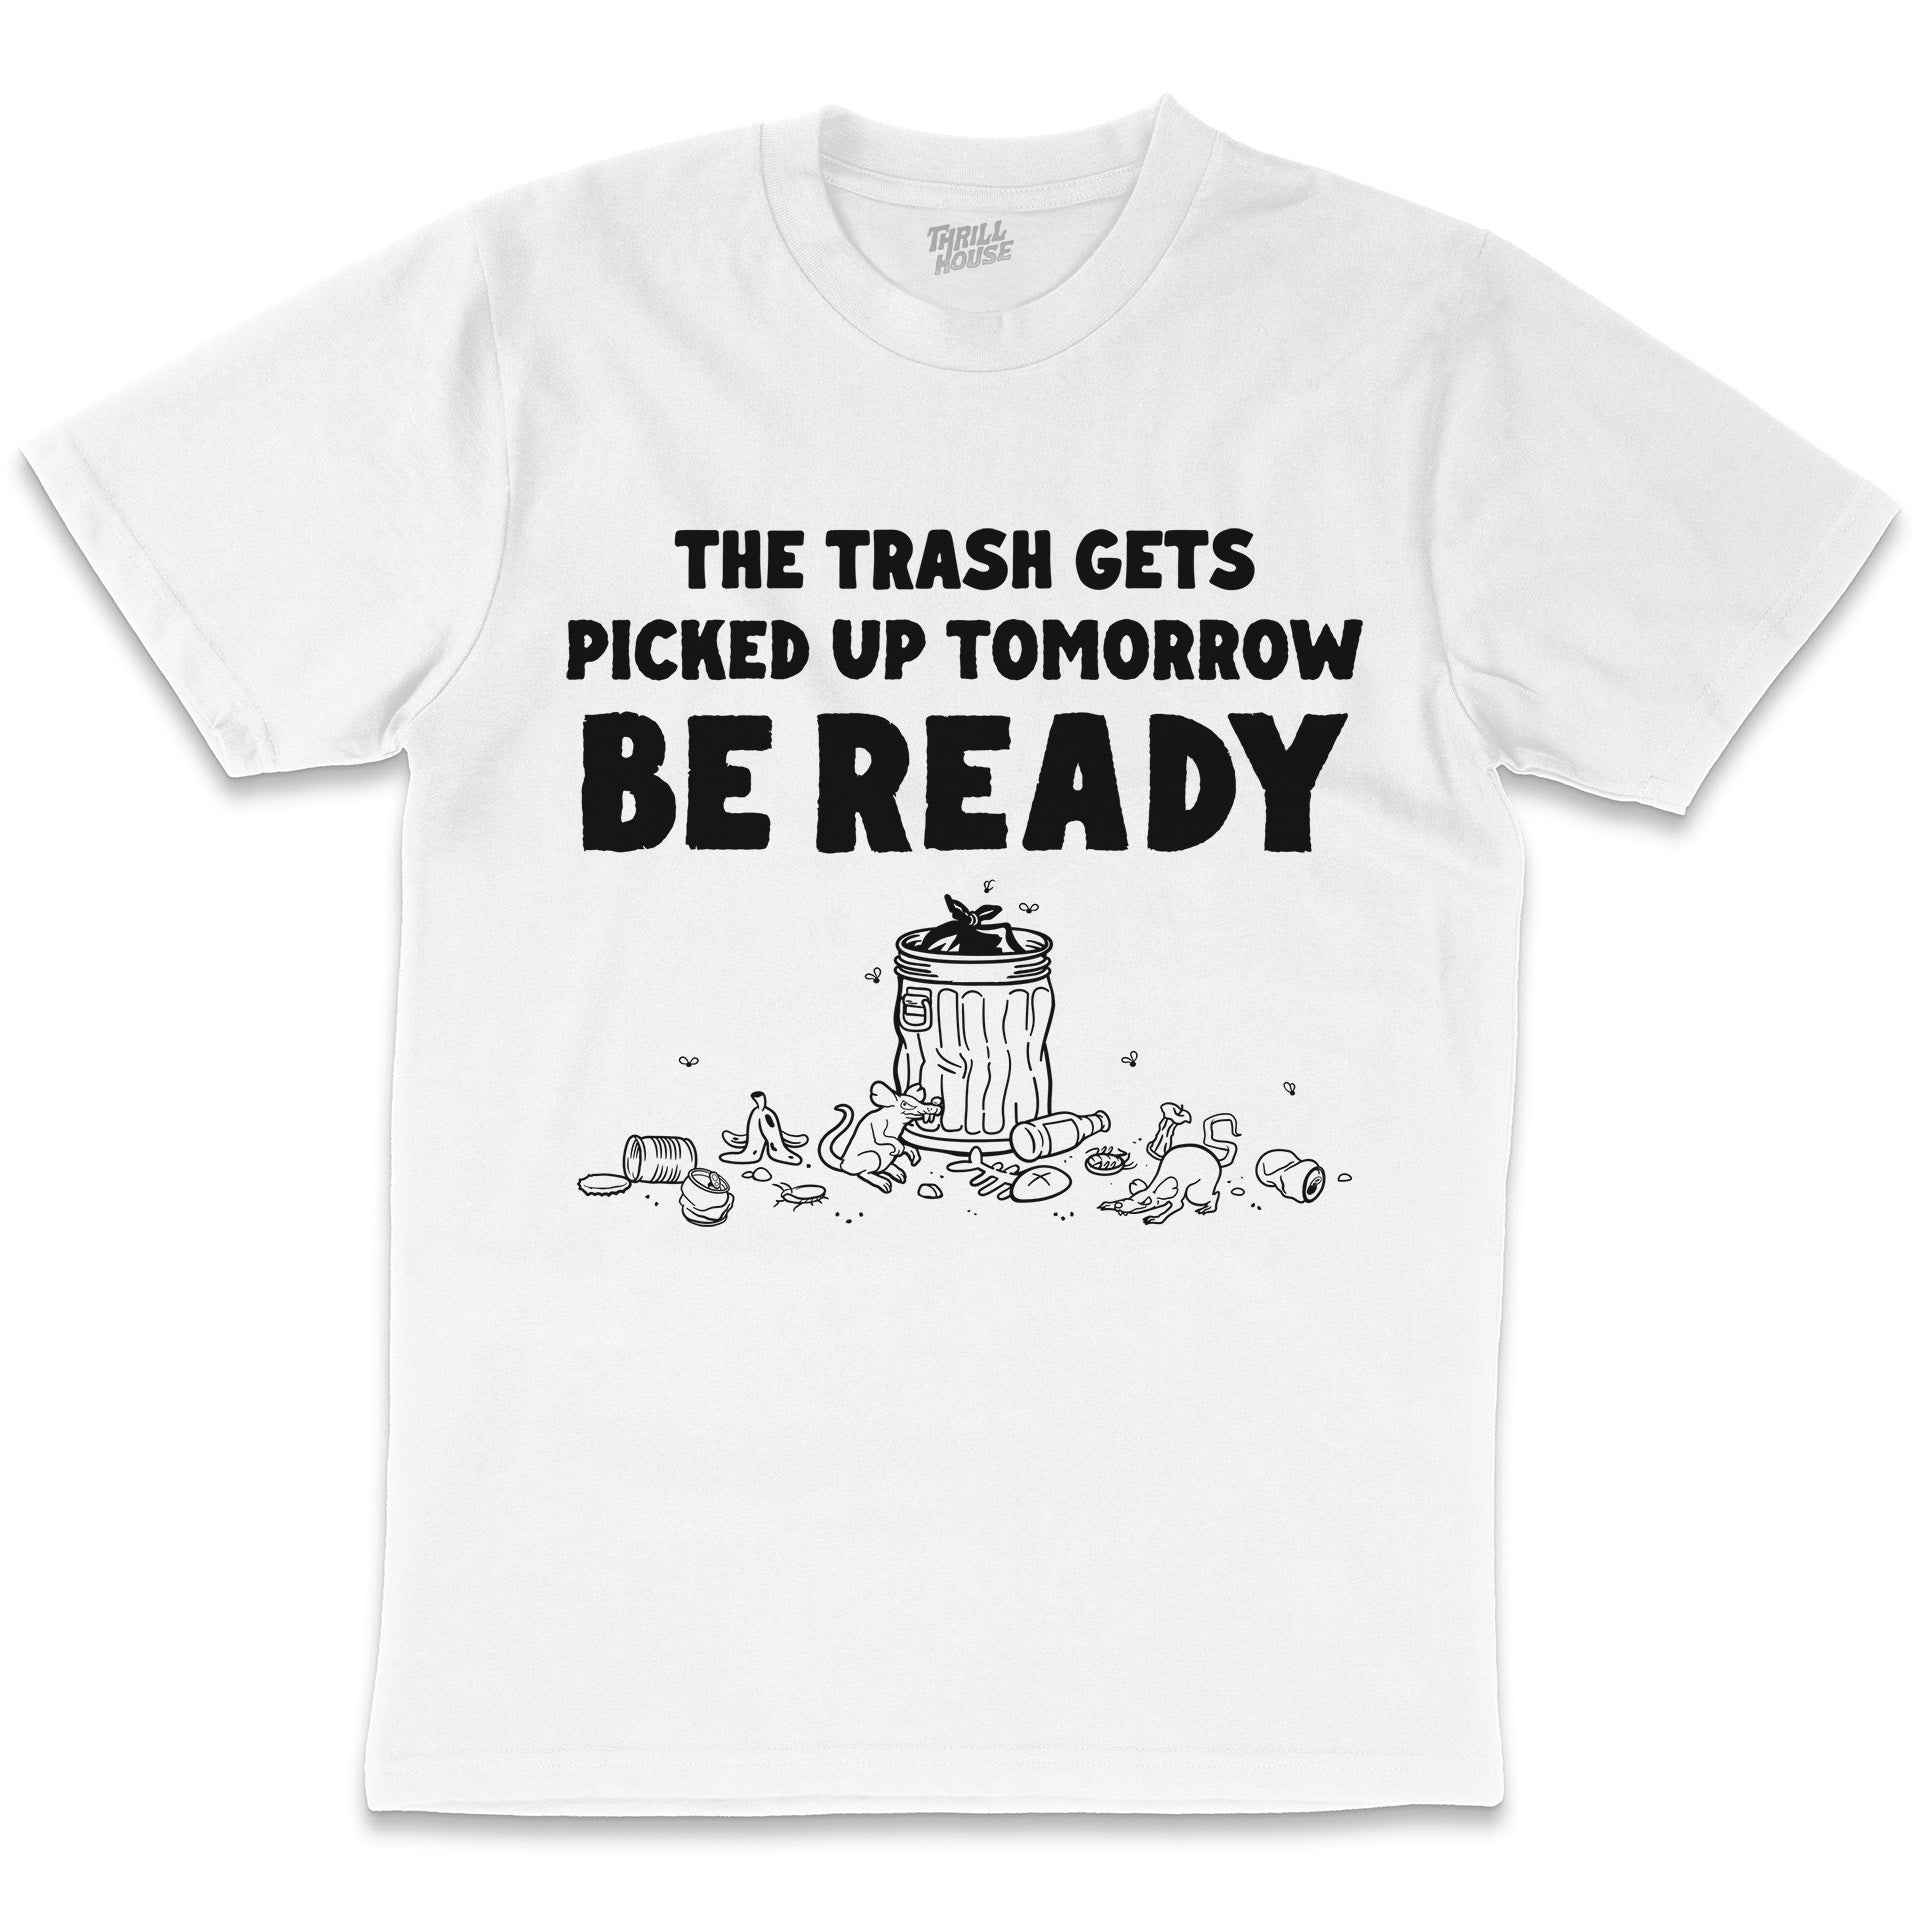 Be Ready Garbage Anti-Social Funny Rude Sarcastic Humour Animals Critters Trash Trashy Cotton T-Shirt